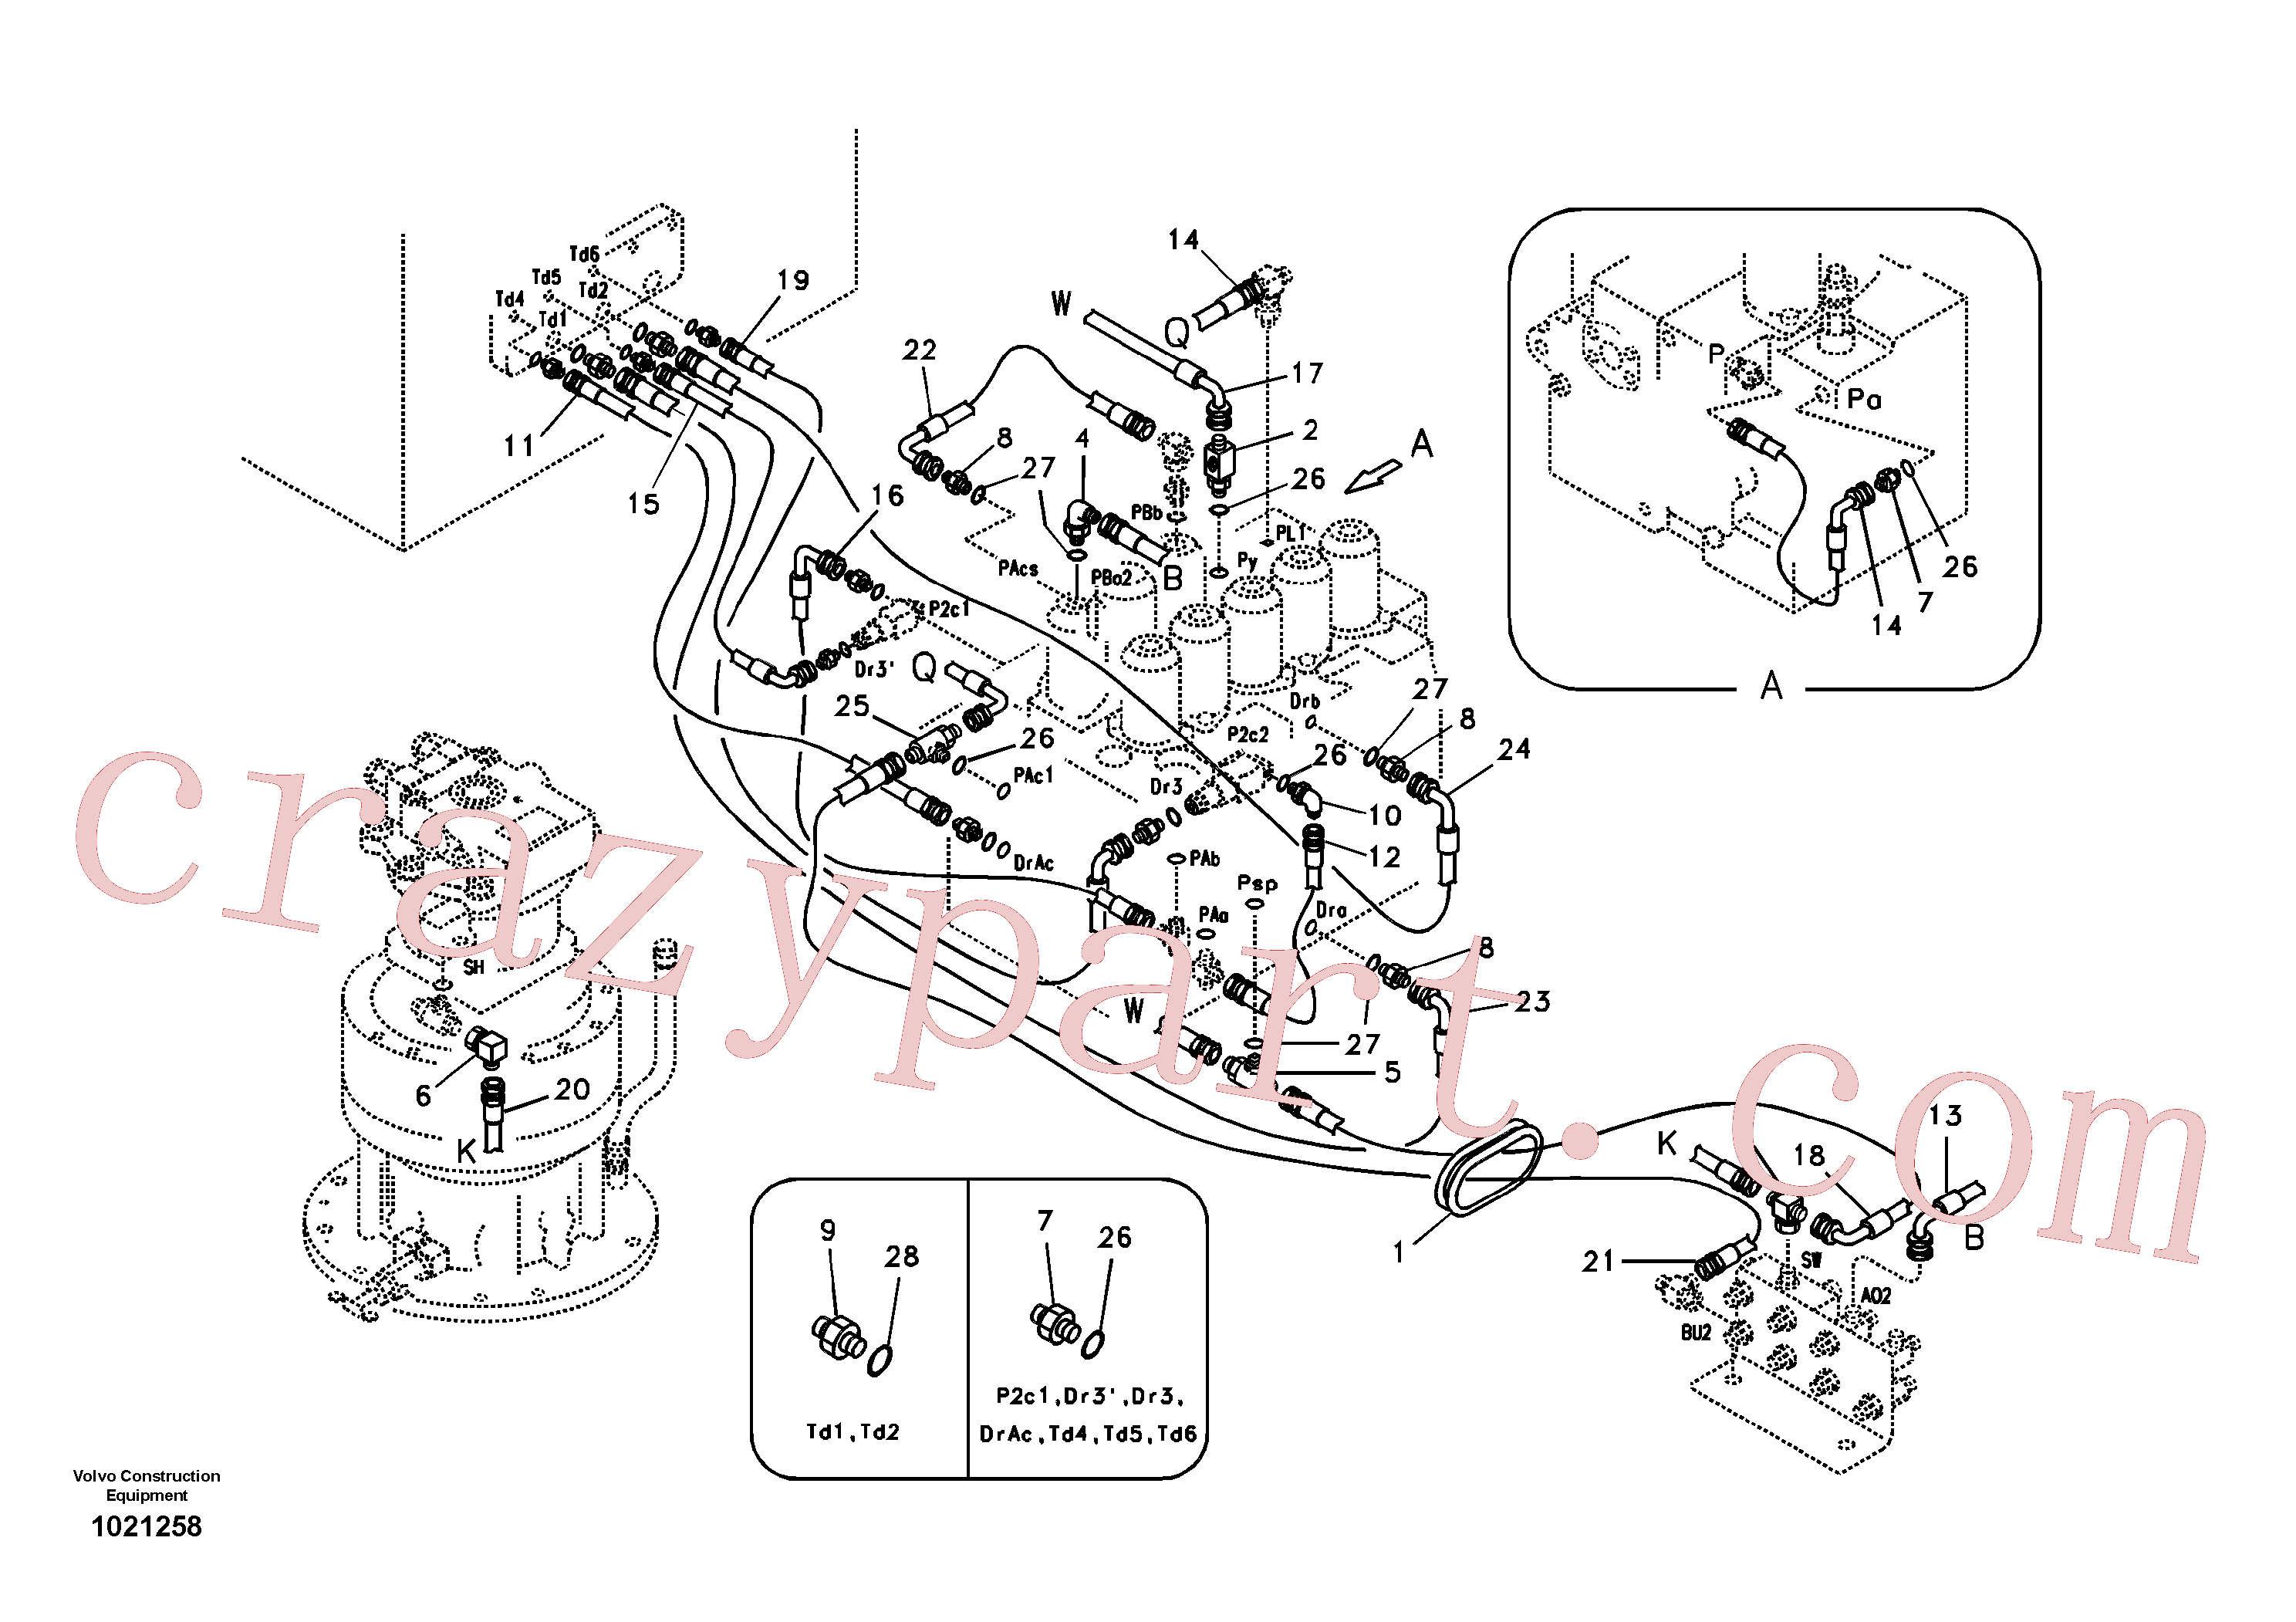 SA9451-03212 for Volvo Servo system, control valve piping.(1021258 assembly)